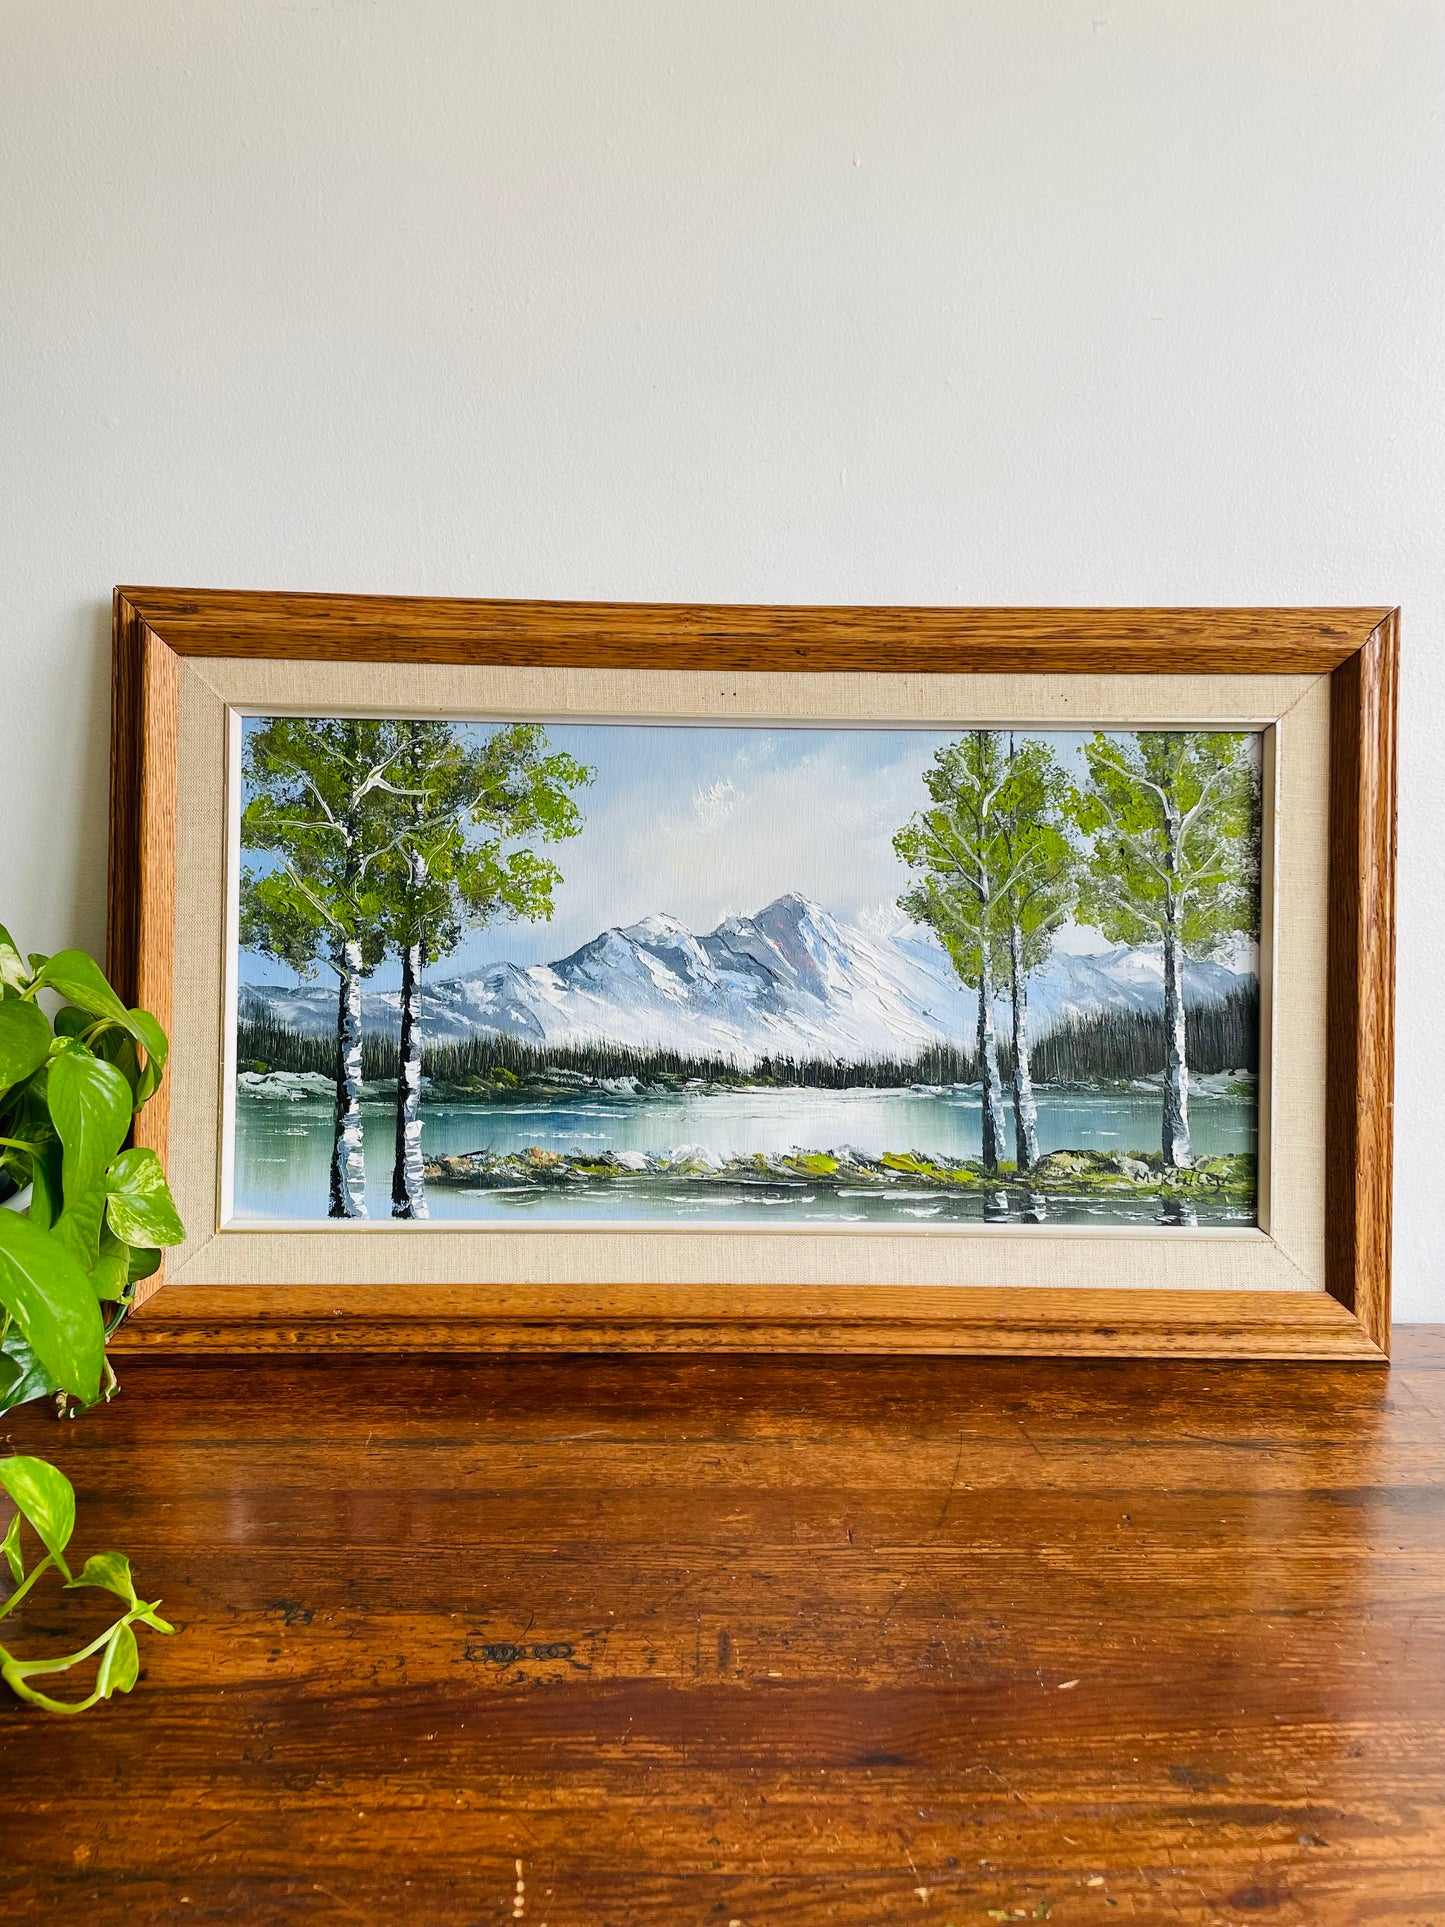 Original Art - Large Landscape Painting of Snowy Mountains Overlooking Lake - Artist Signed